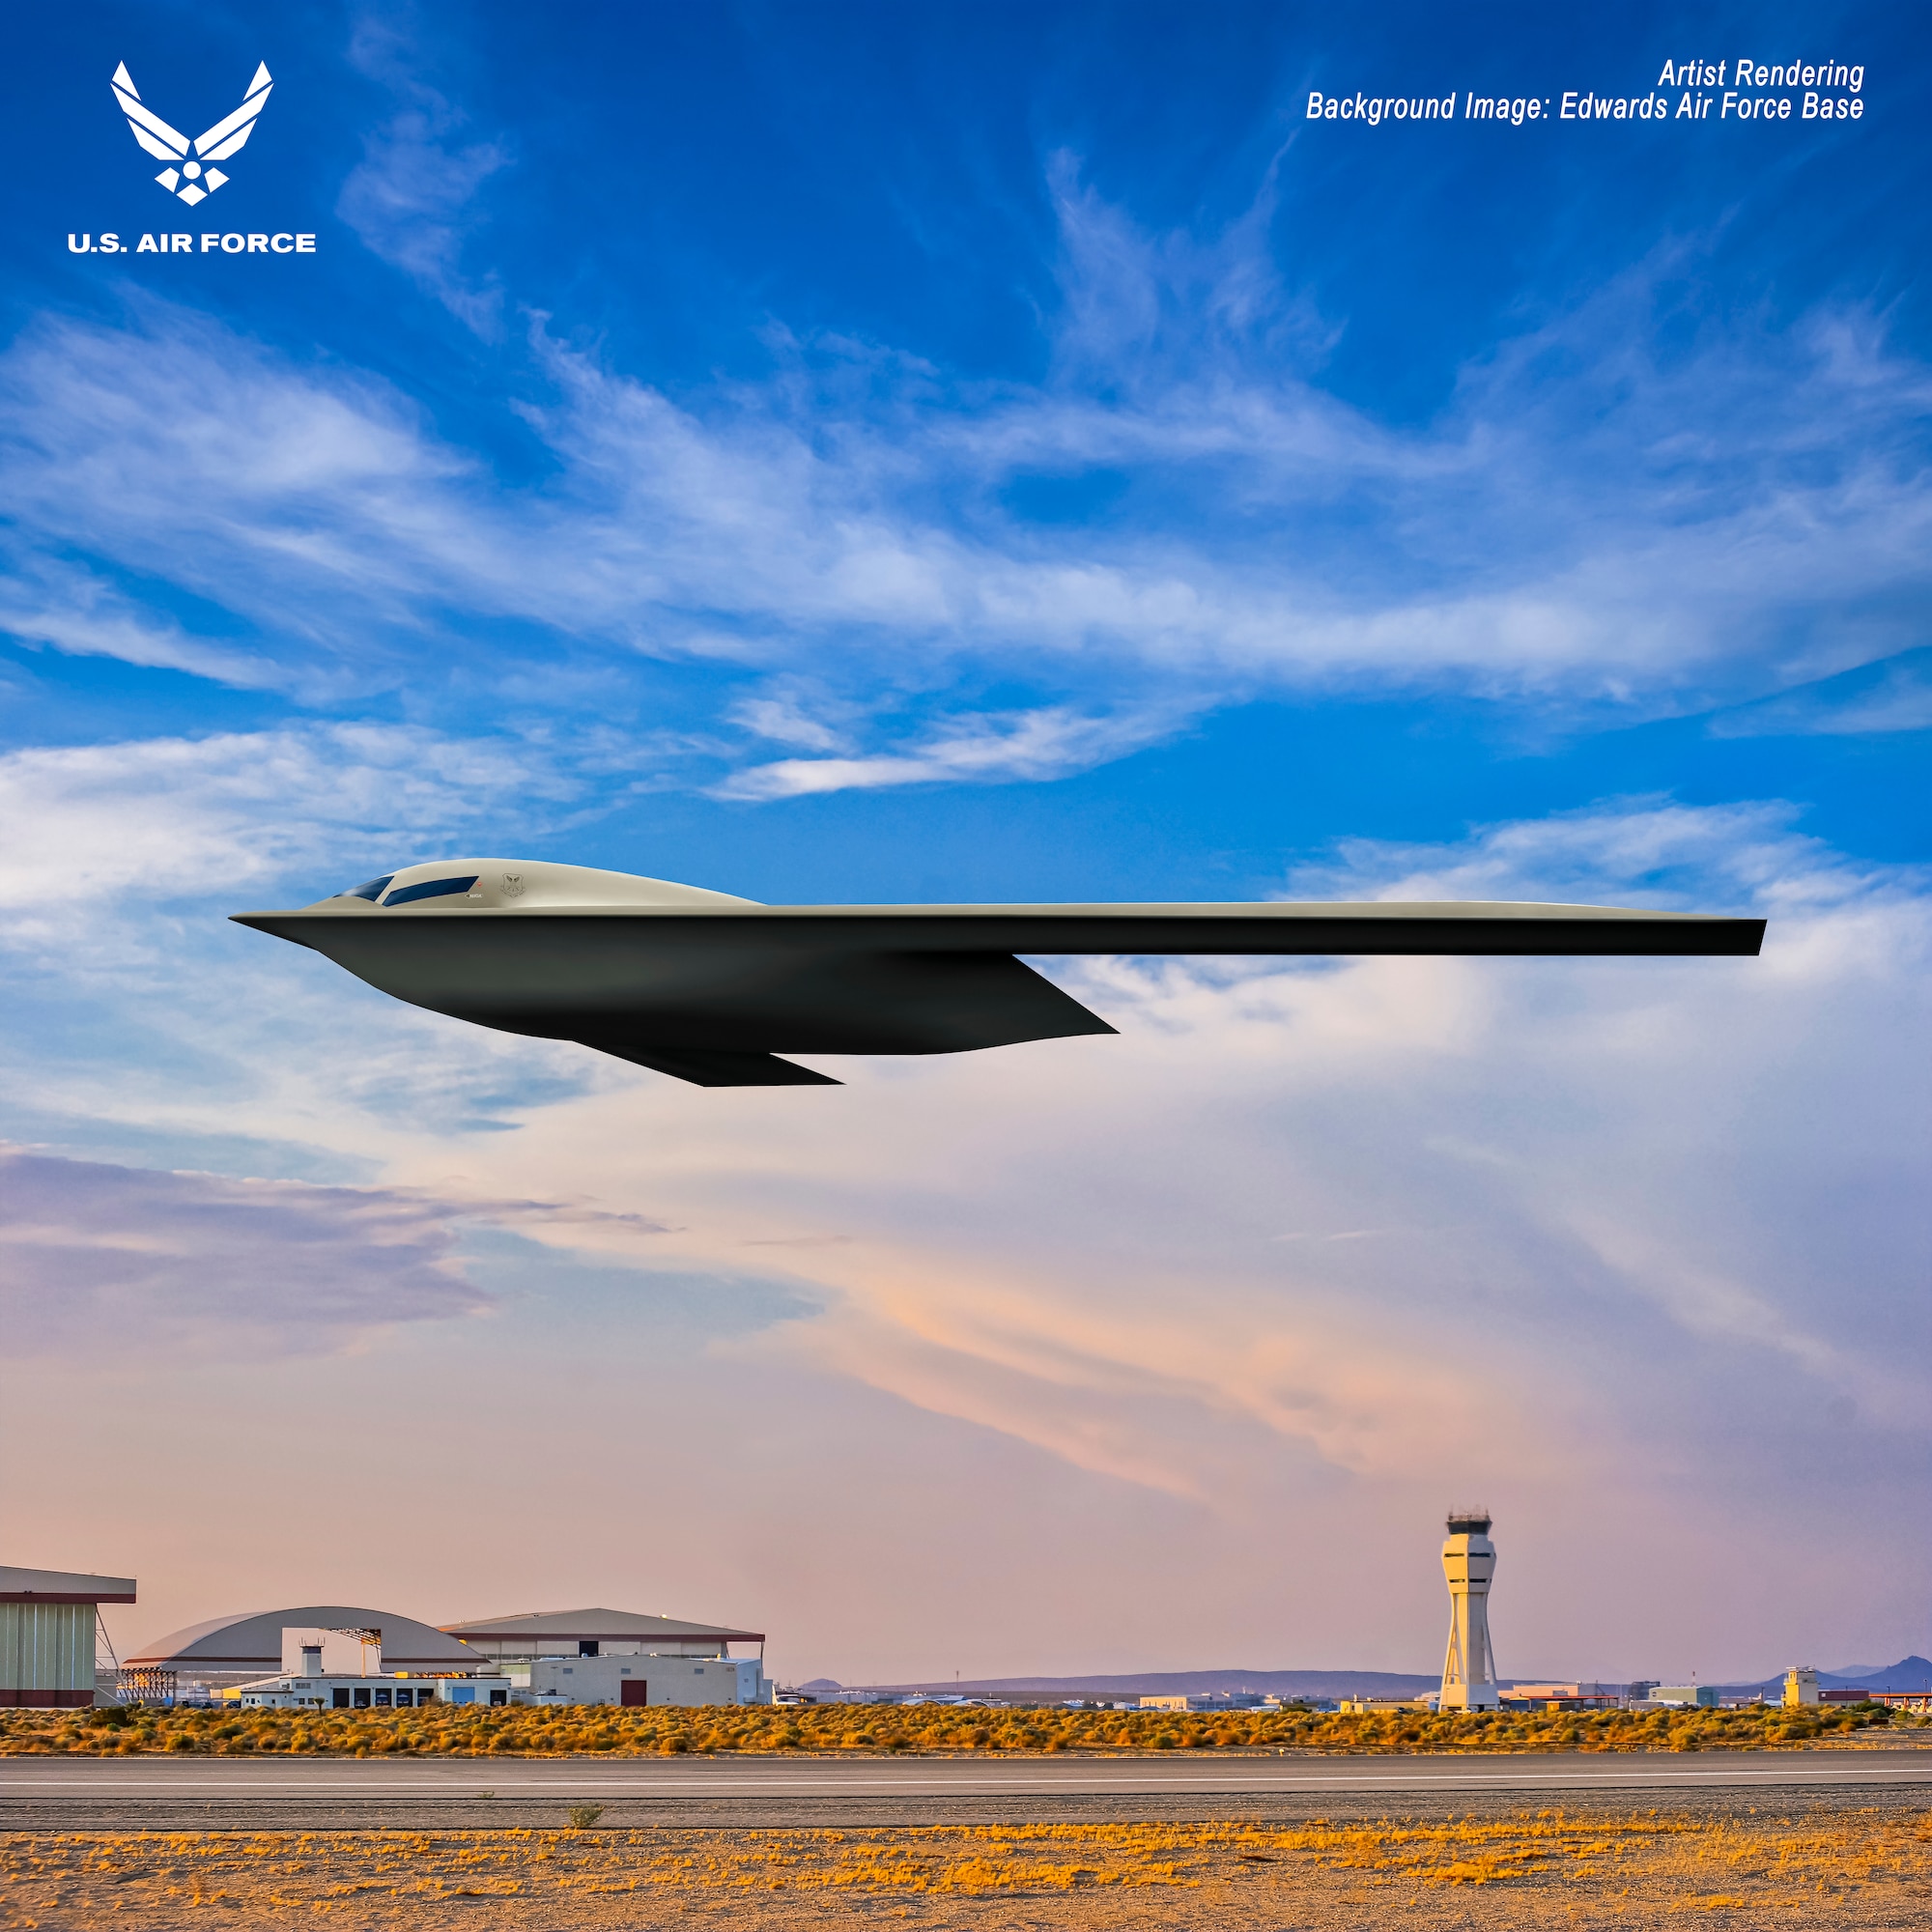 Shown is a B-21 Raider artist rendering graphic. The rendering highlights the future stealth bomber with Edwards Air Force Base, Calif., as the backdrop. Designed to perform long range conventional and nuclear missions and to operate in tomorrow’s high end threat environment, the B-21 will be a visible and flexible component of the nuclear triad. (U.S. Air Force graphic)